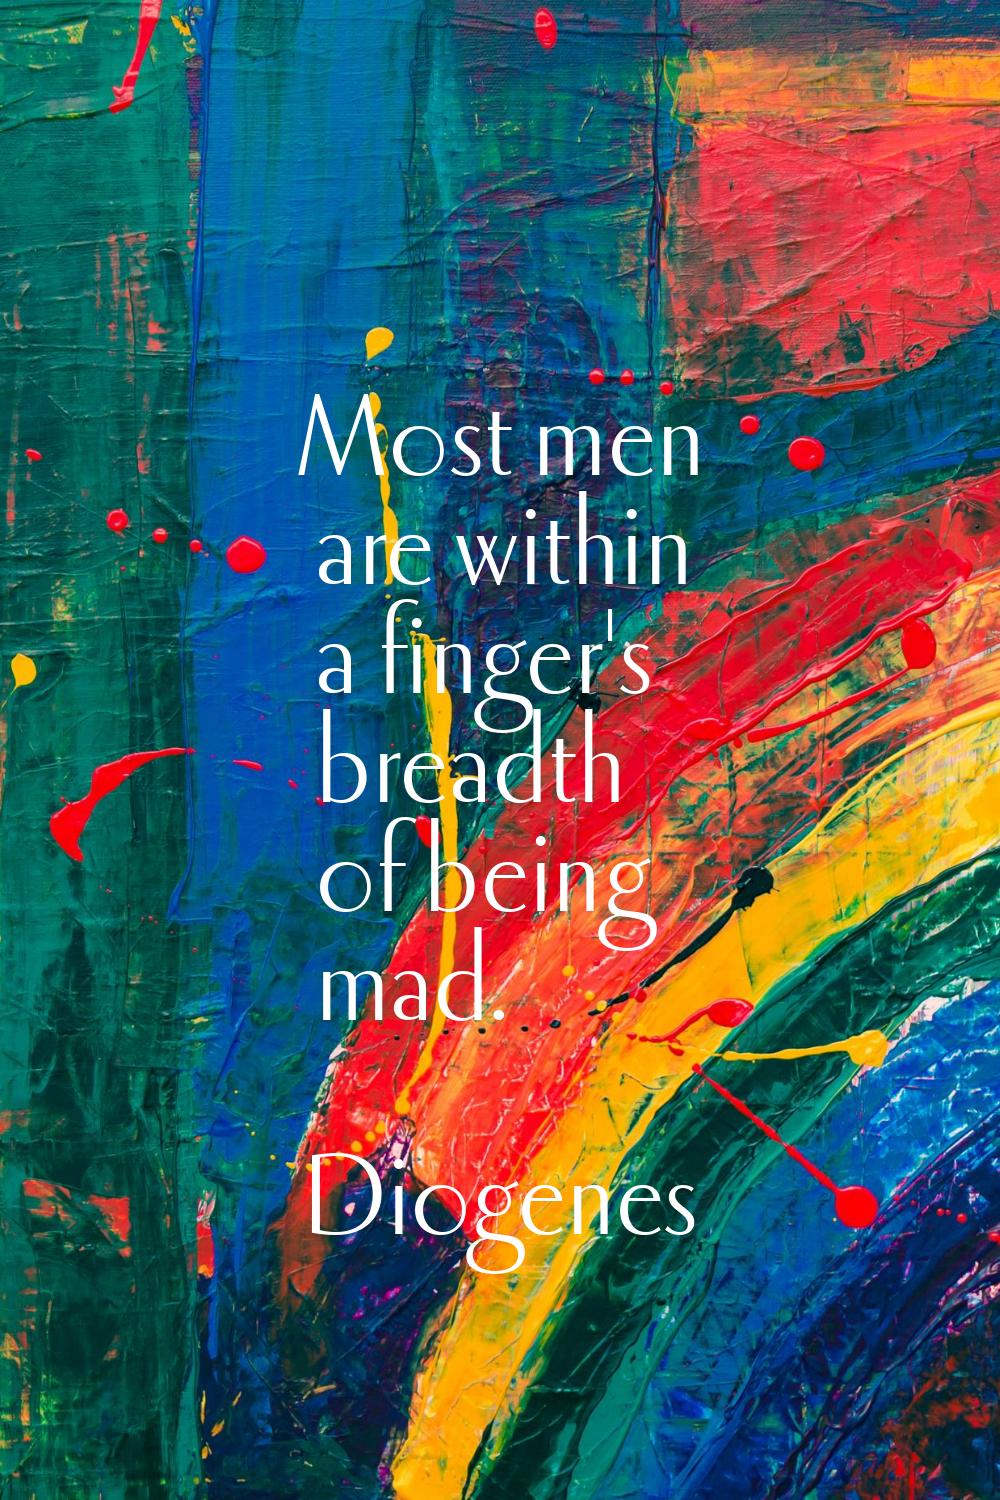 Most men are within a finger's breadth of being mad.